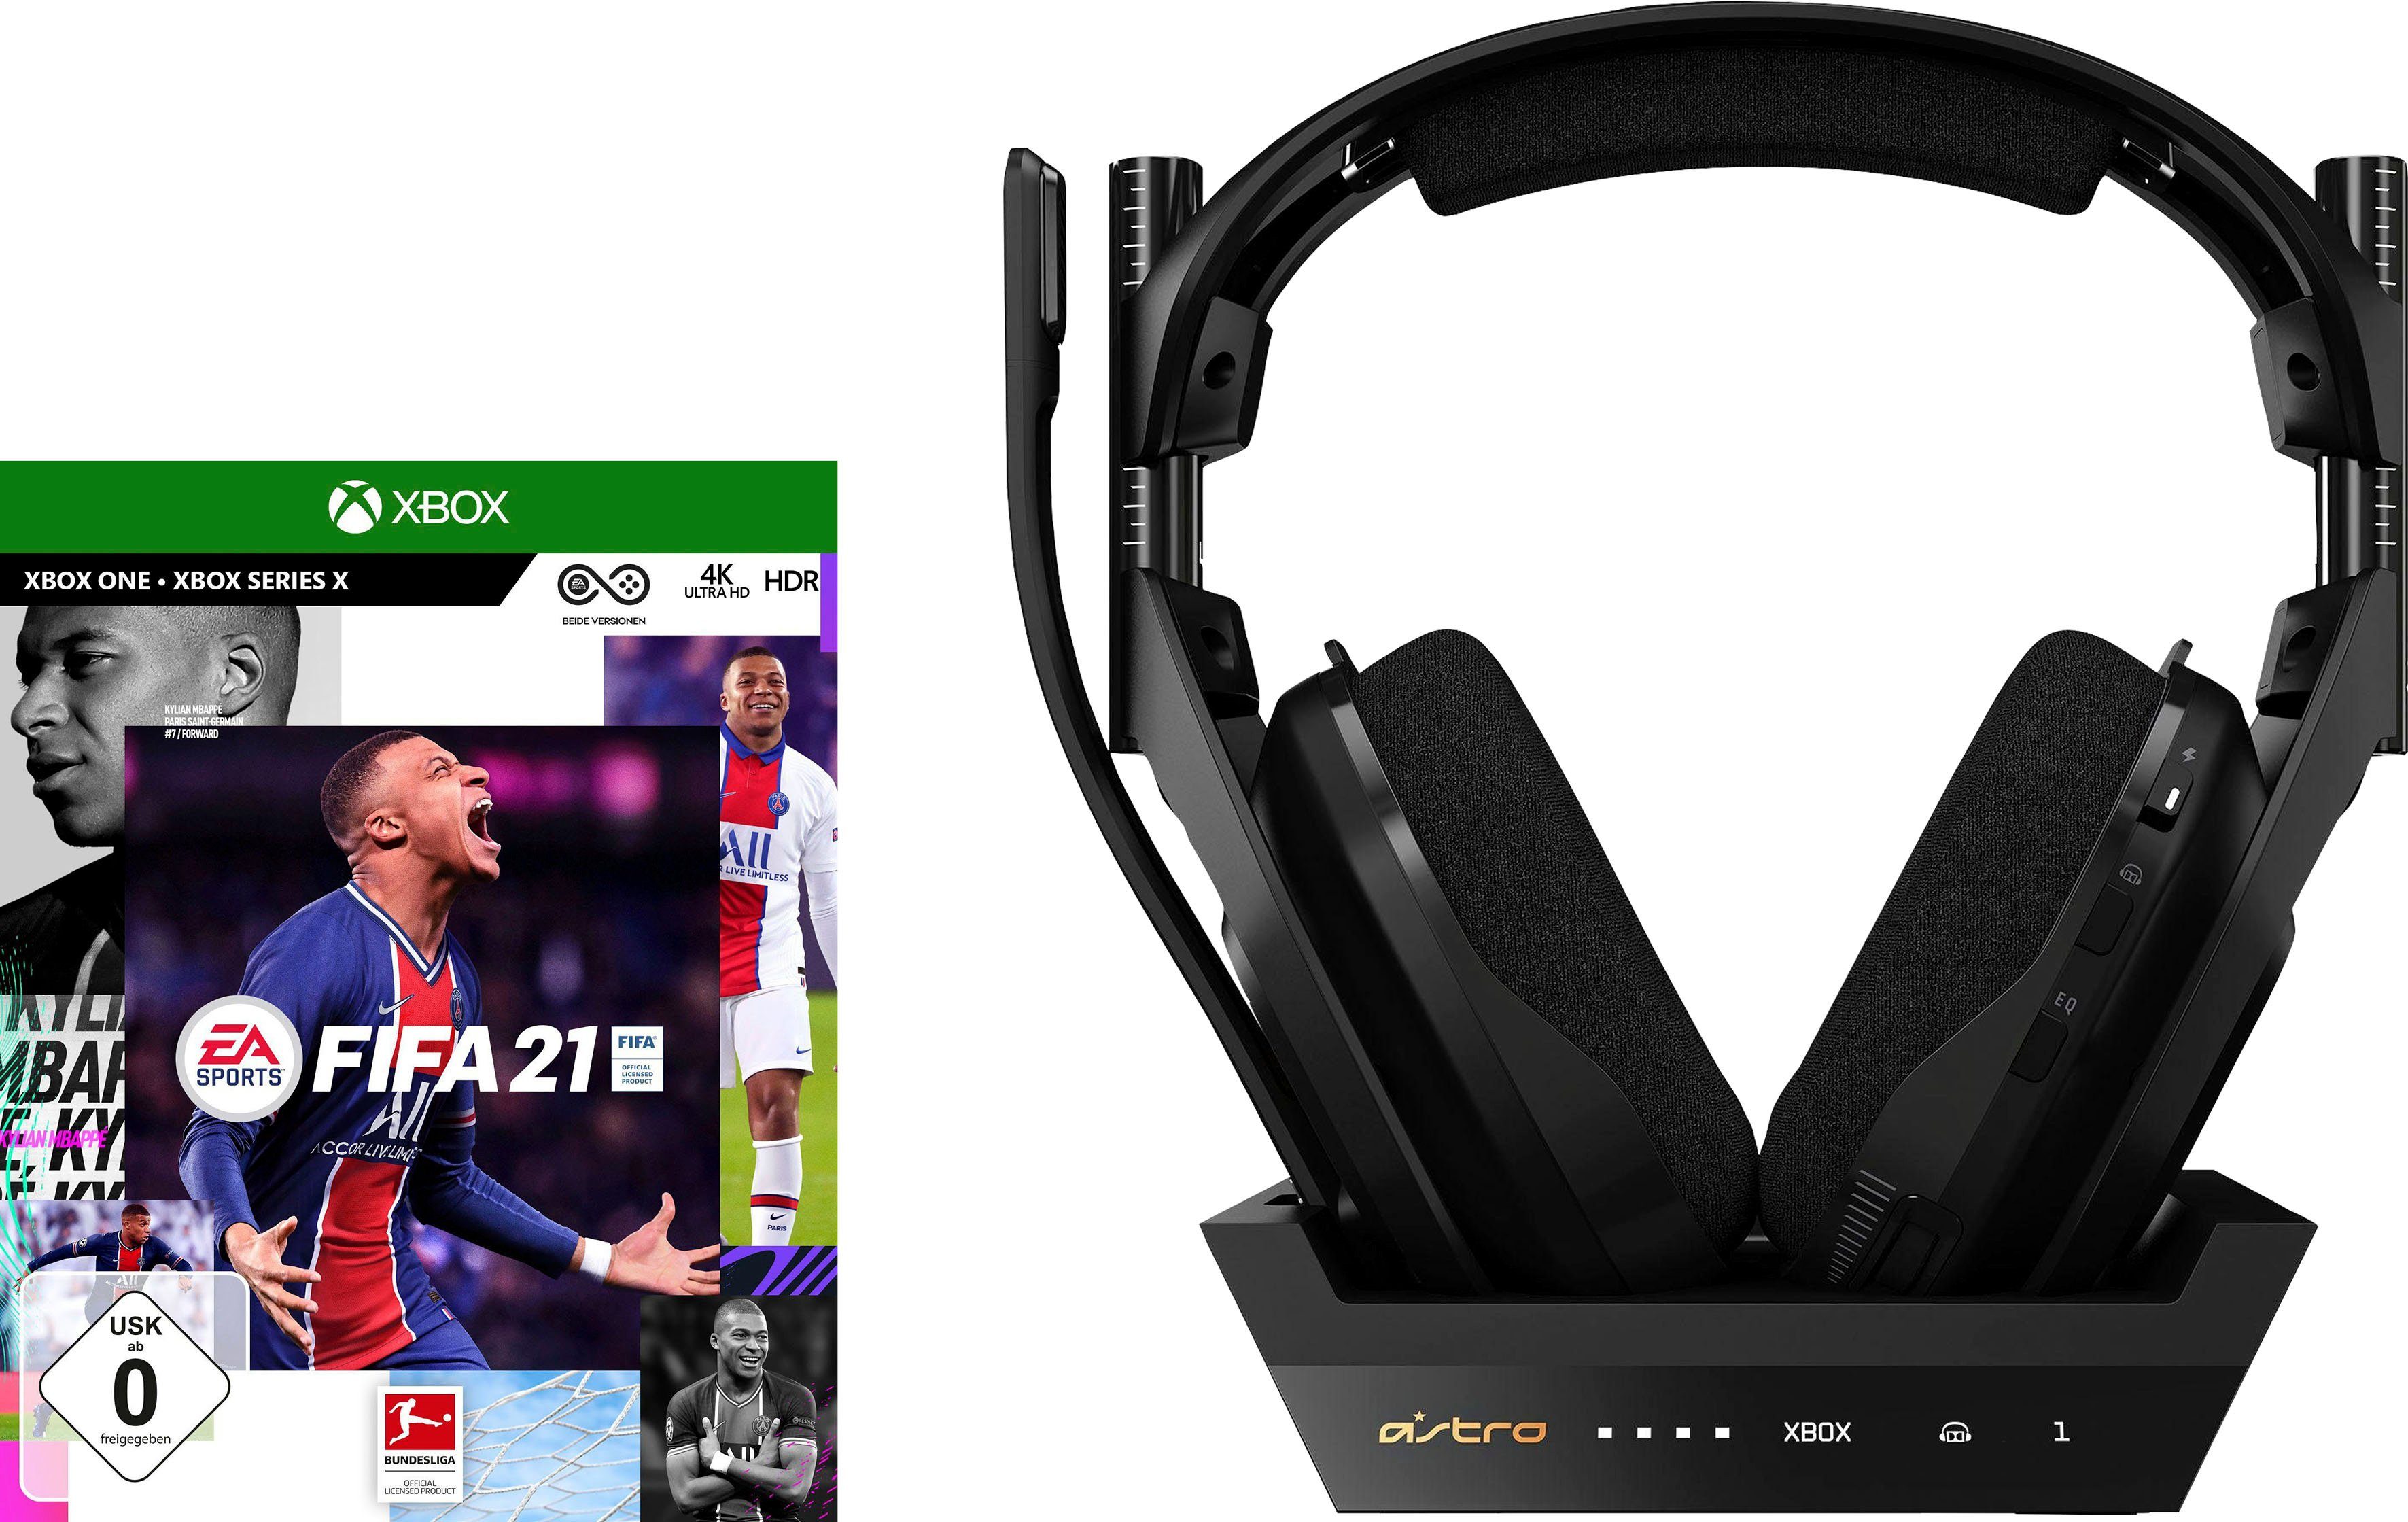 Fifa + X1 (Geräuschisolierung) 21 Gaming-Headset ASTRO A50